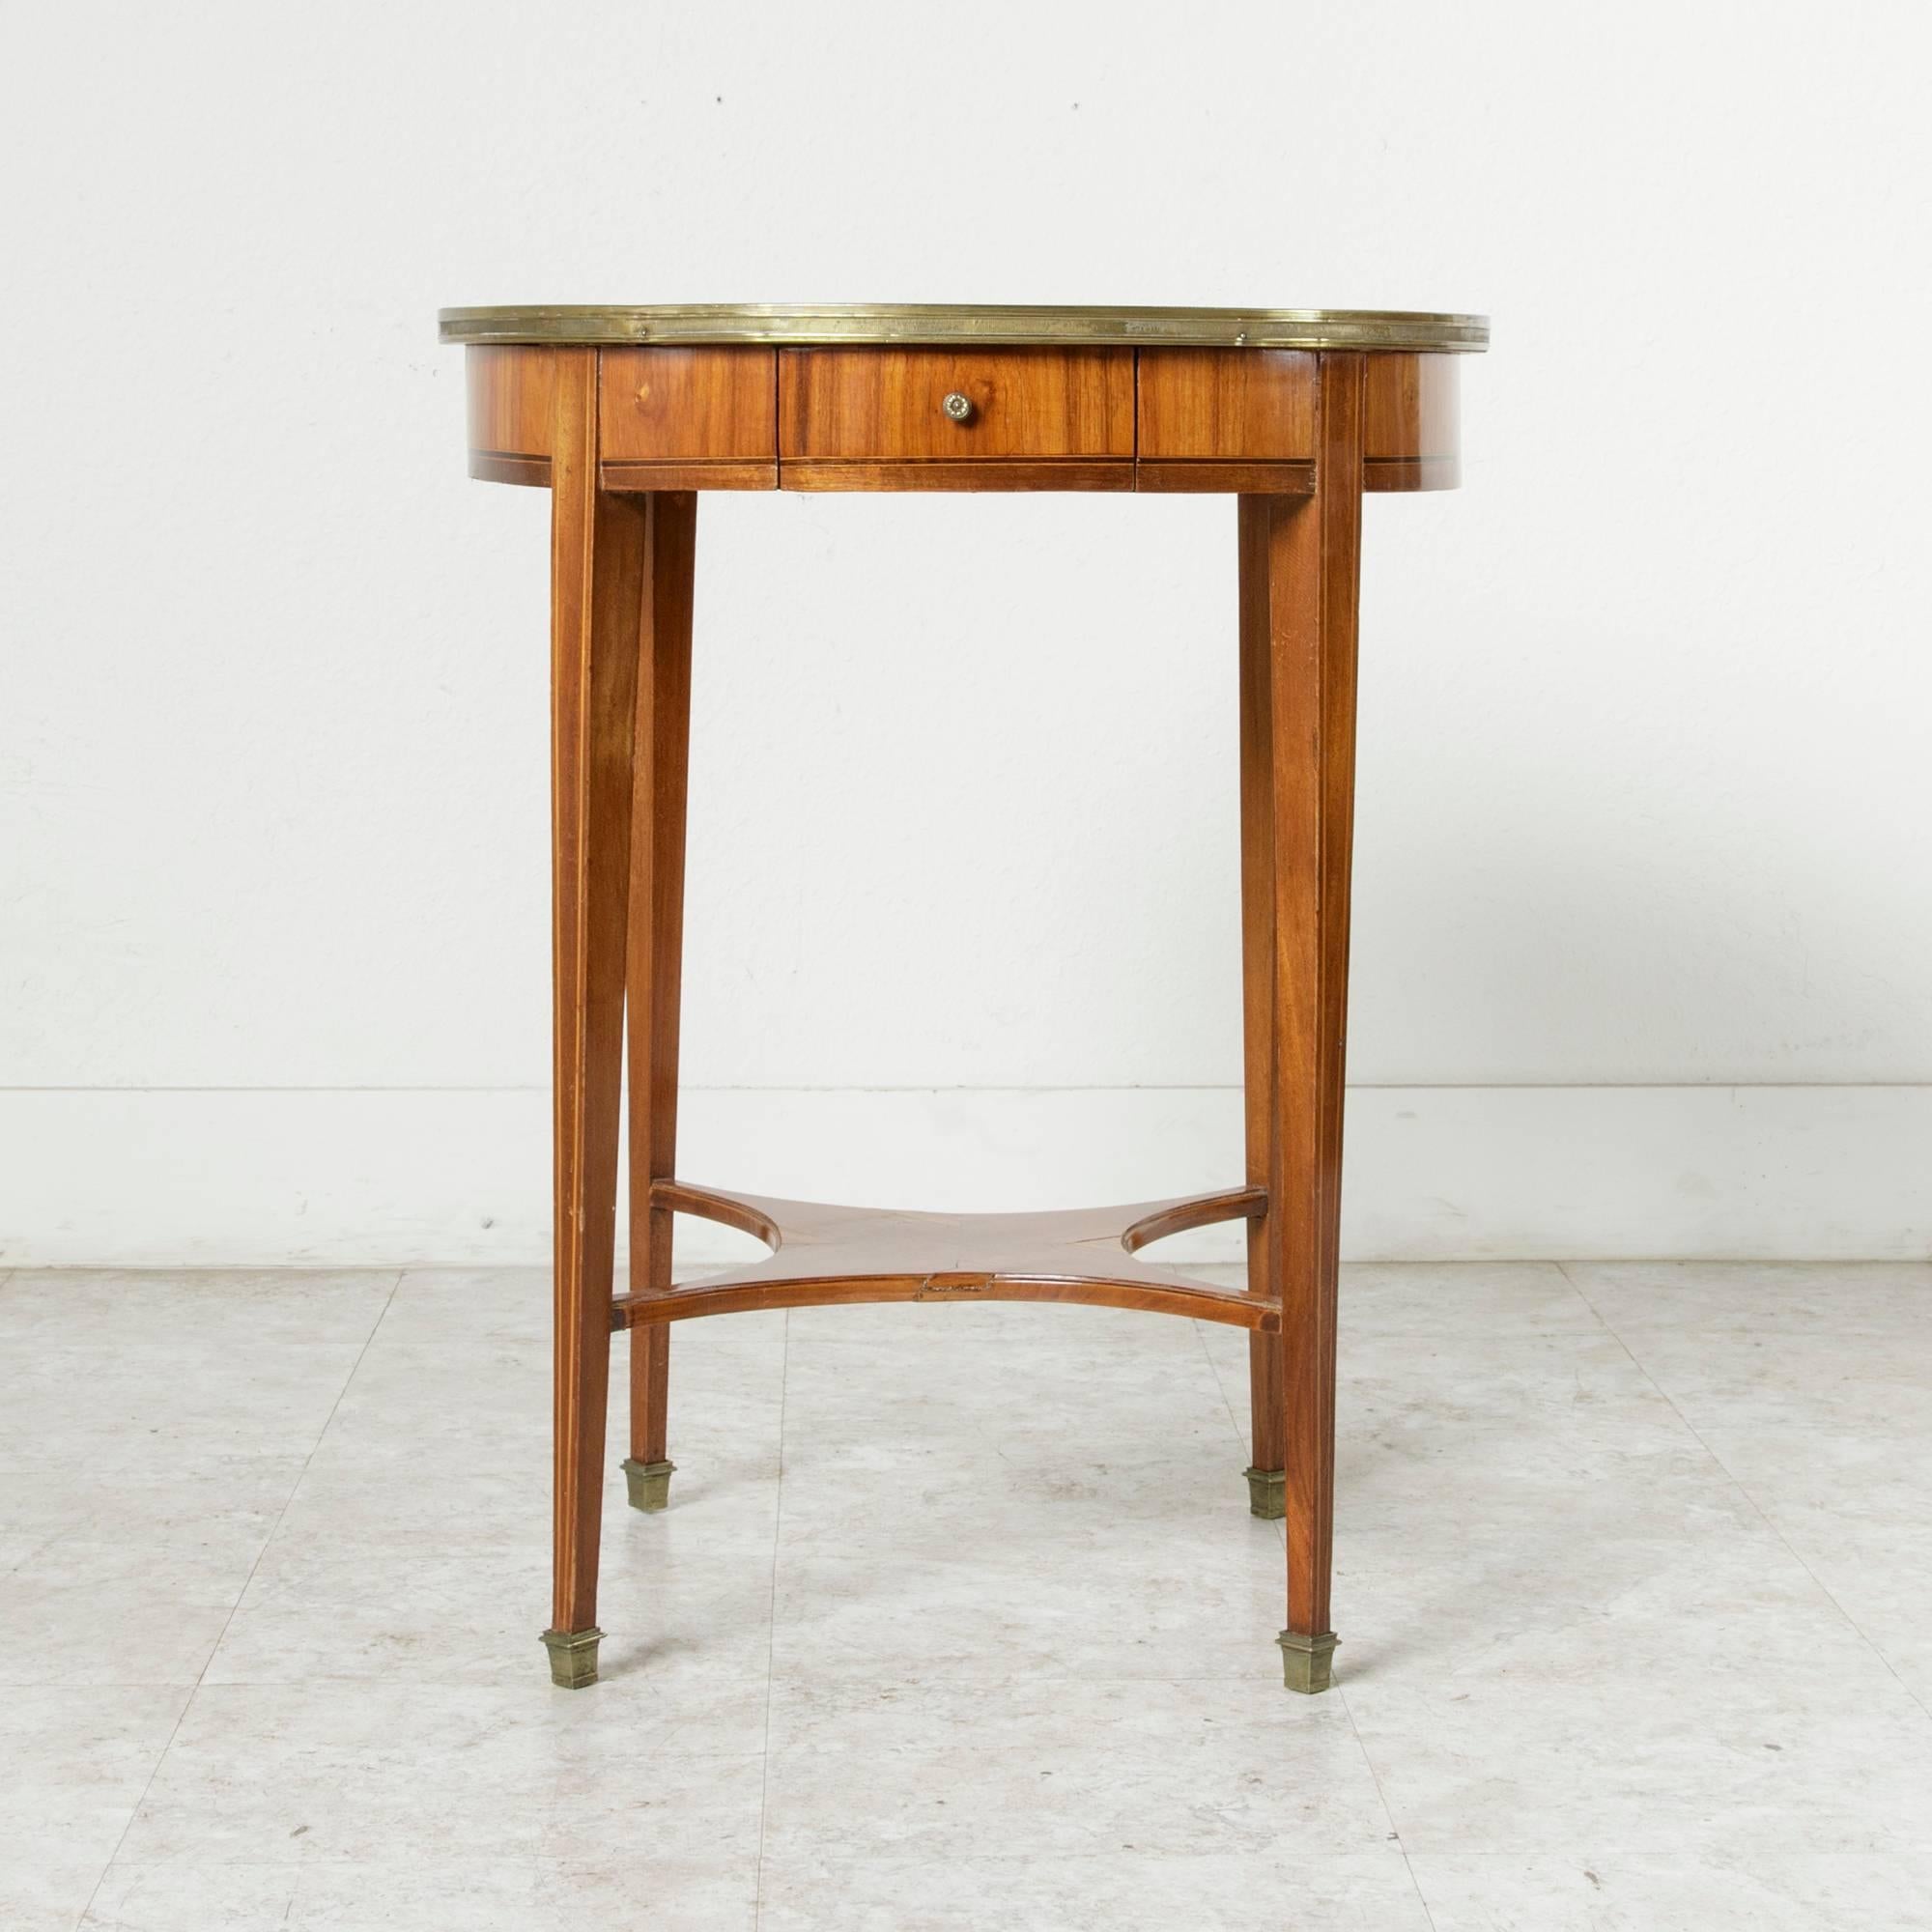 Mid-20th Century Art Deco Period Rosewood and Walnut Marquetry Gueridon or Side Table, Brass Trim